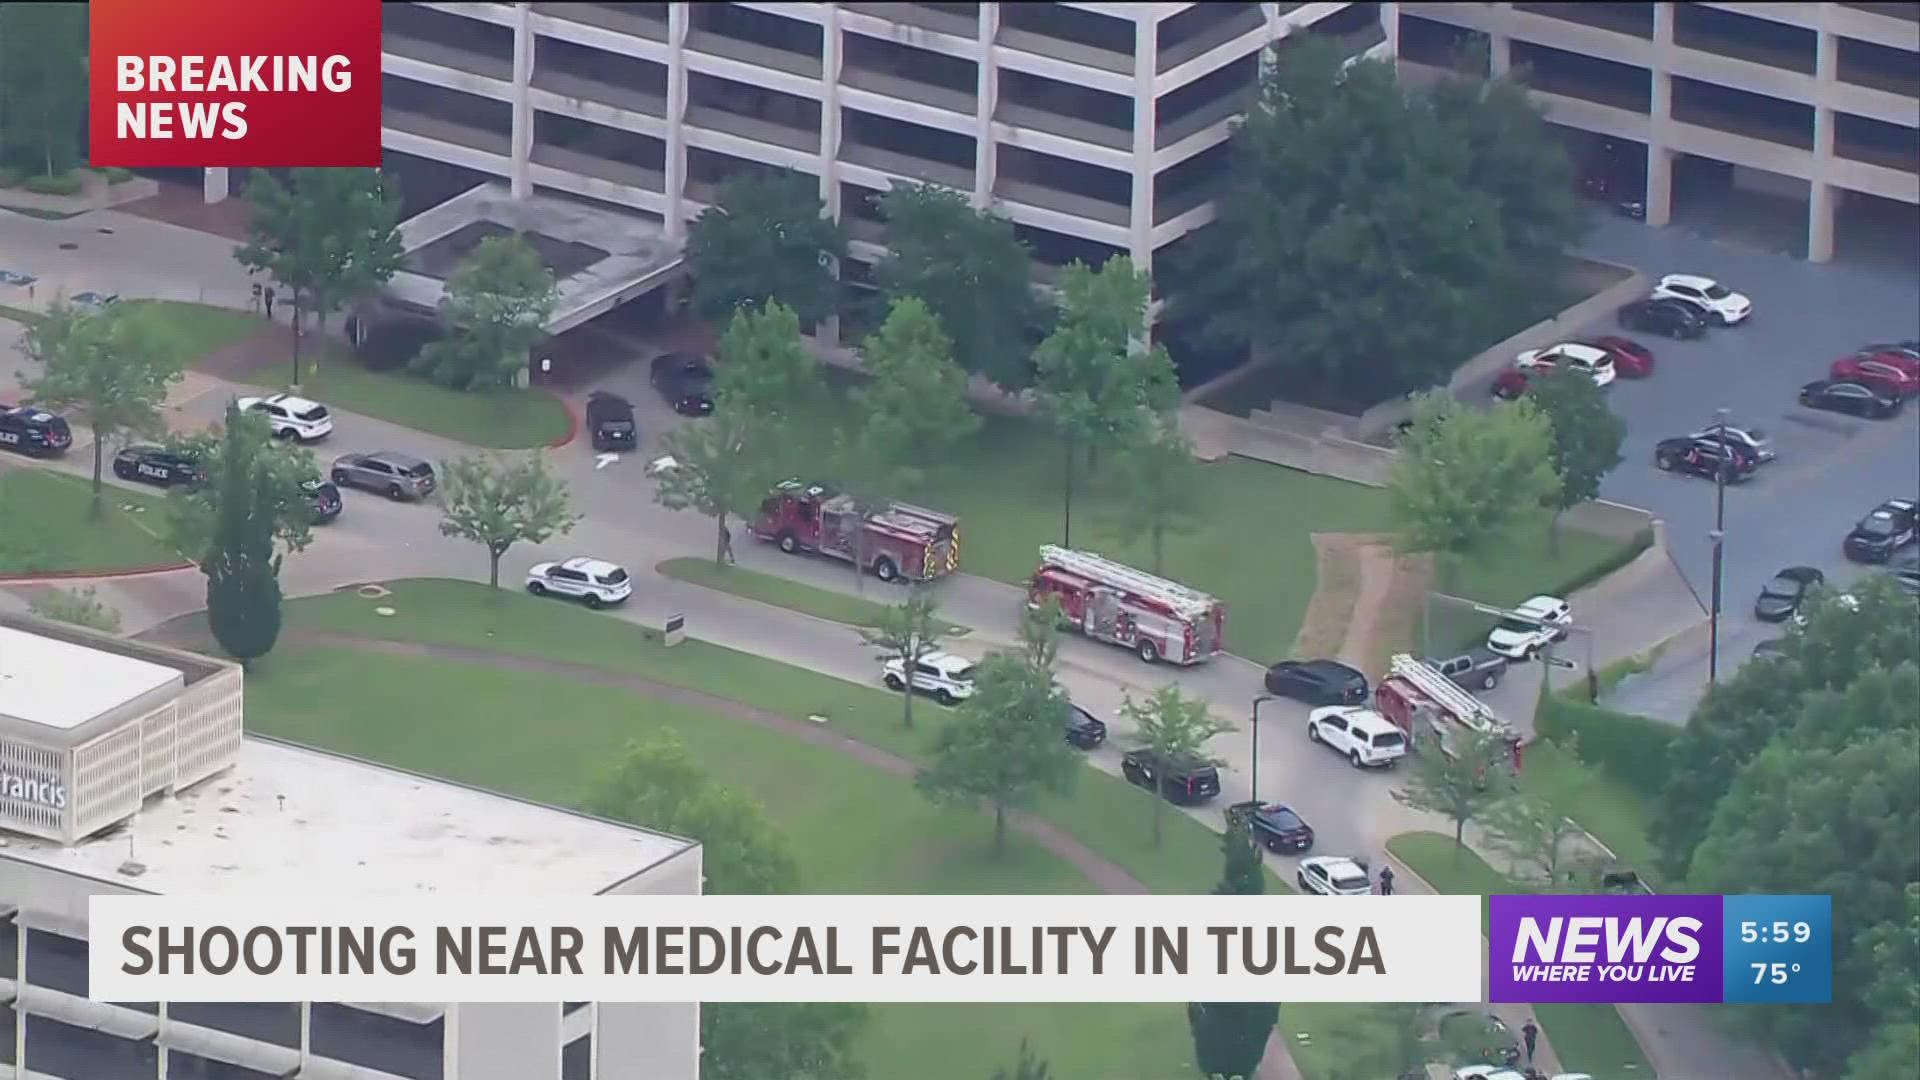 Tulsa police said on social media that the shooter was dead, and that there were several injuries and "potentially multiple casualties".